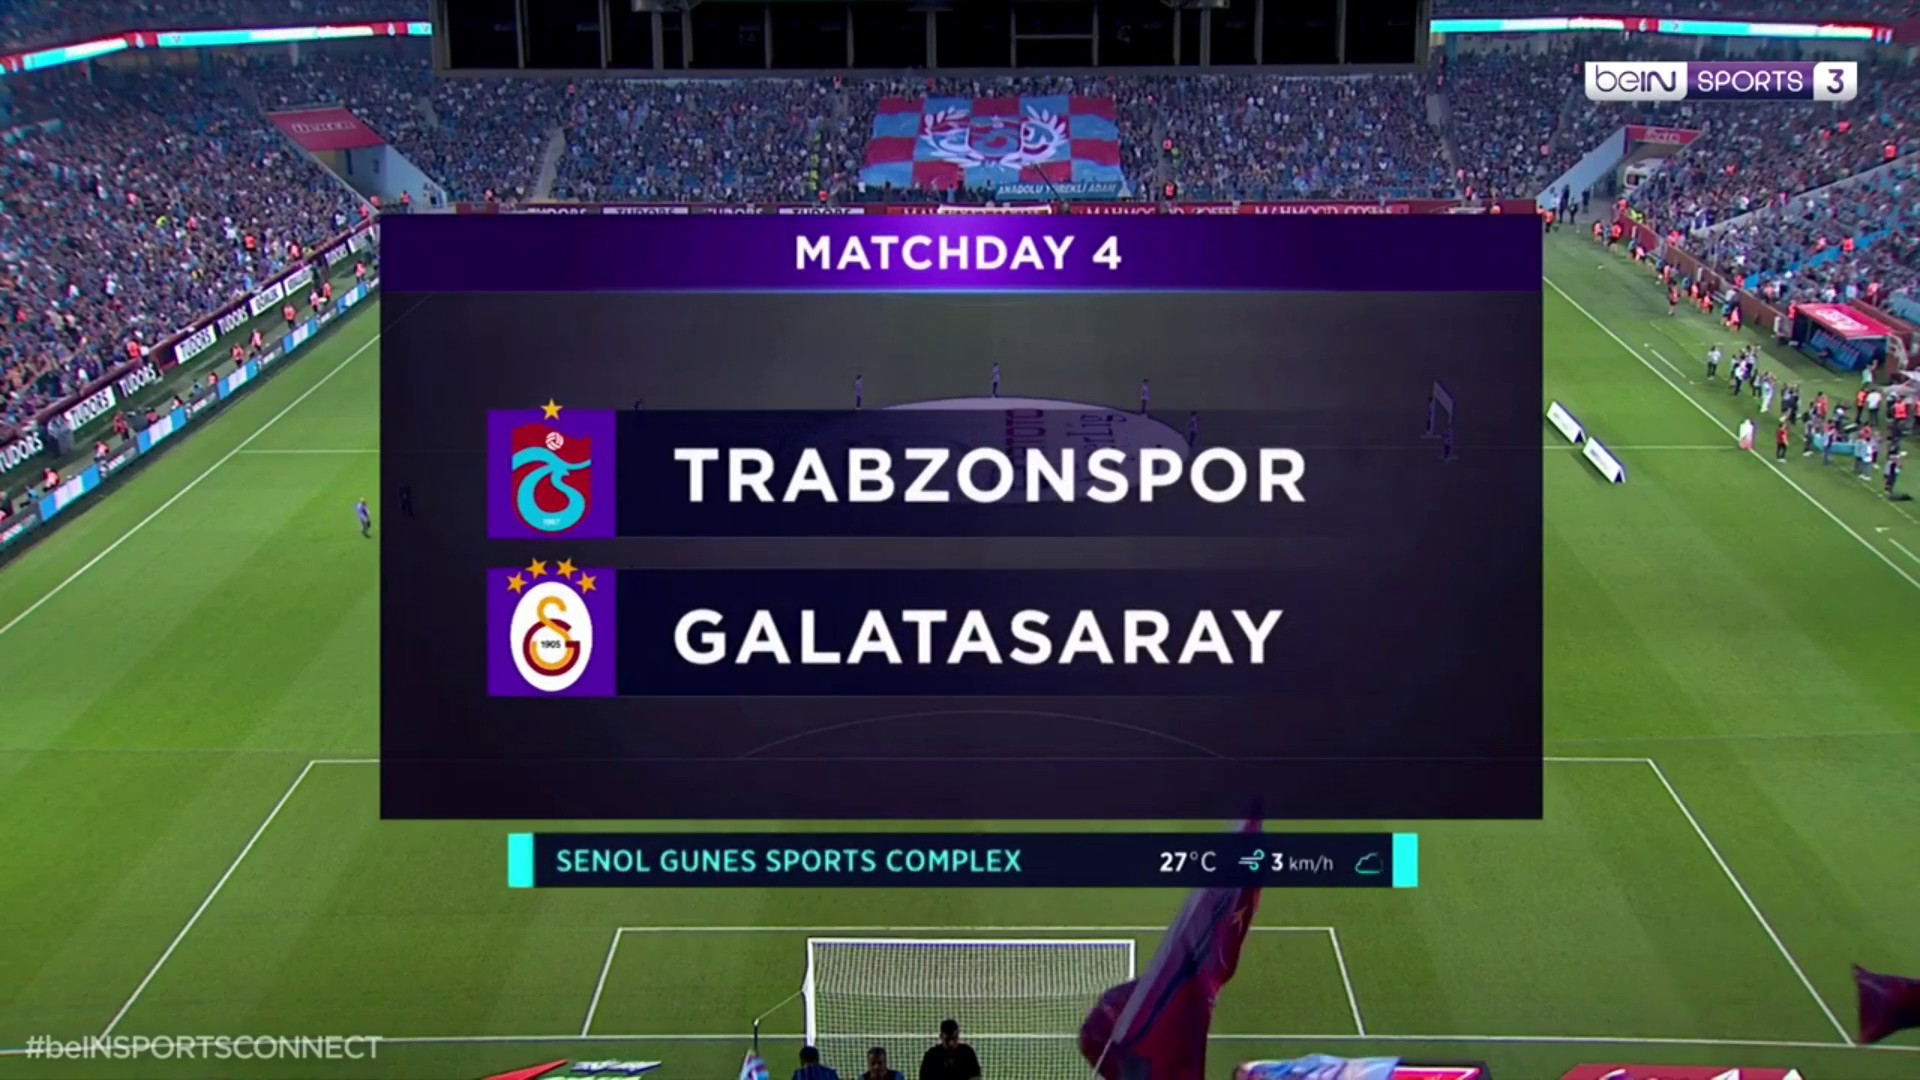 Galatasaray draw 0-0 with Trabzonspor